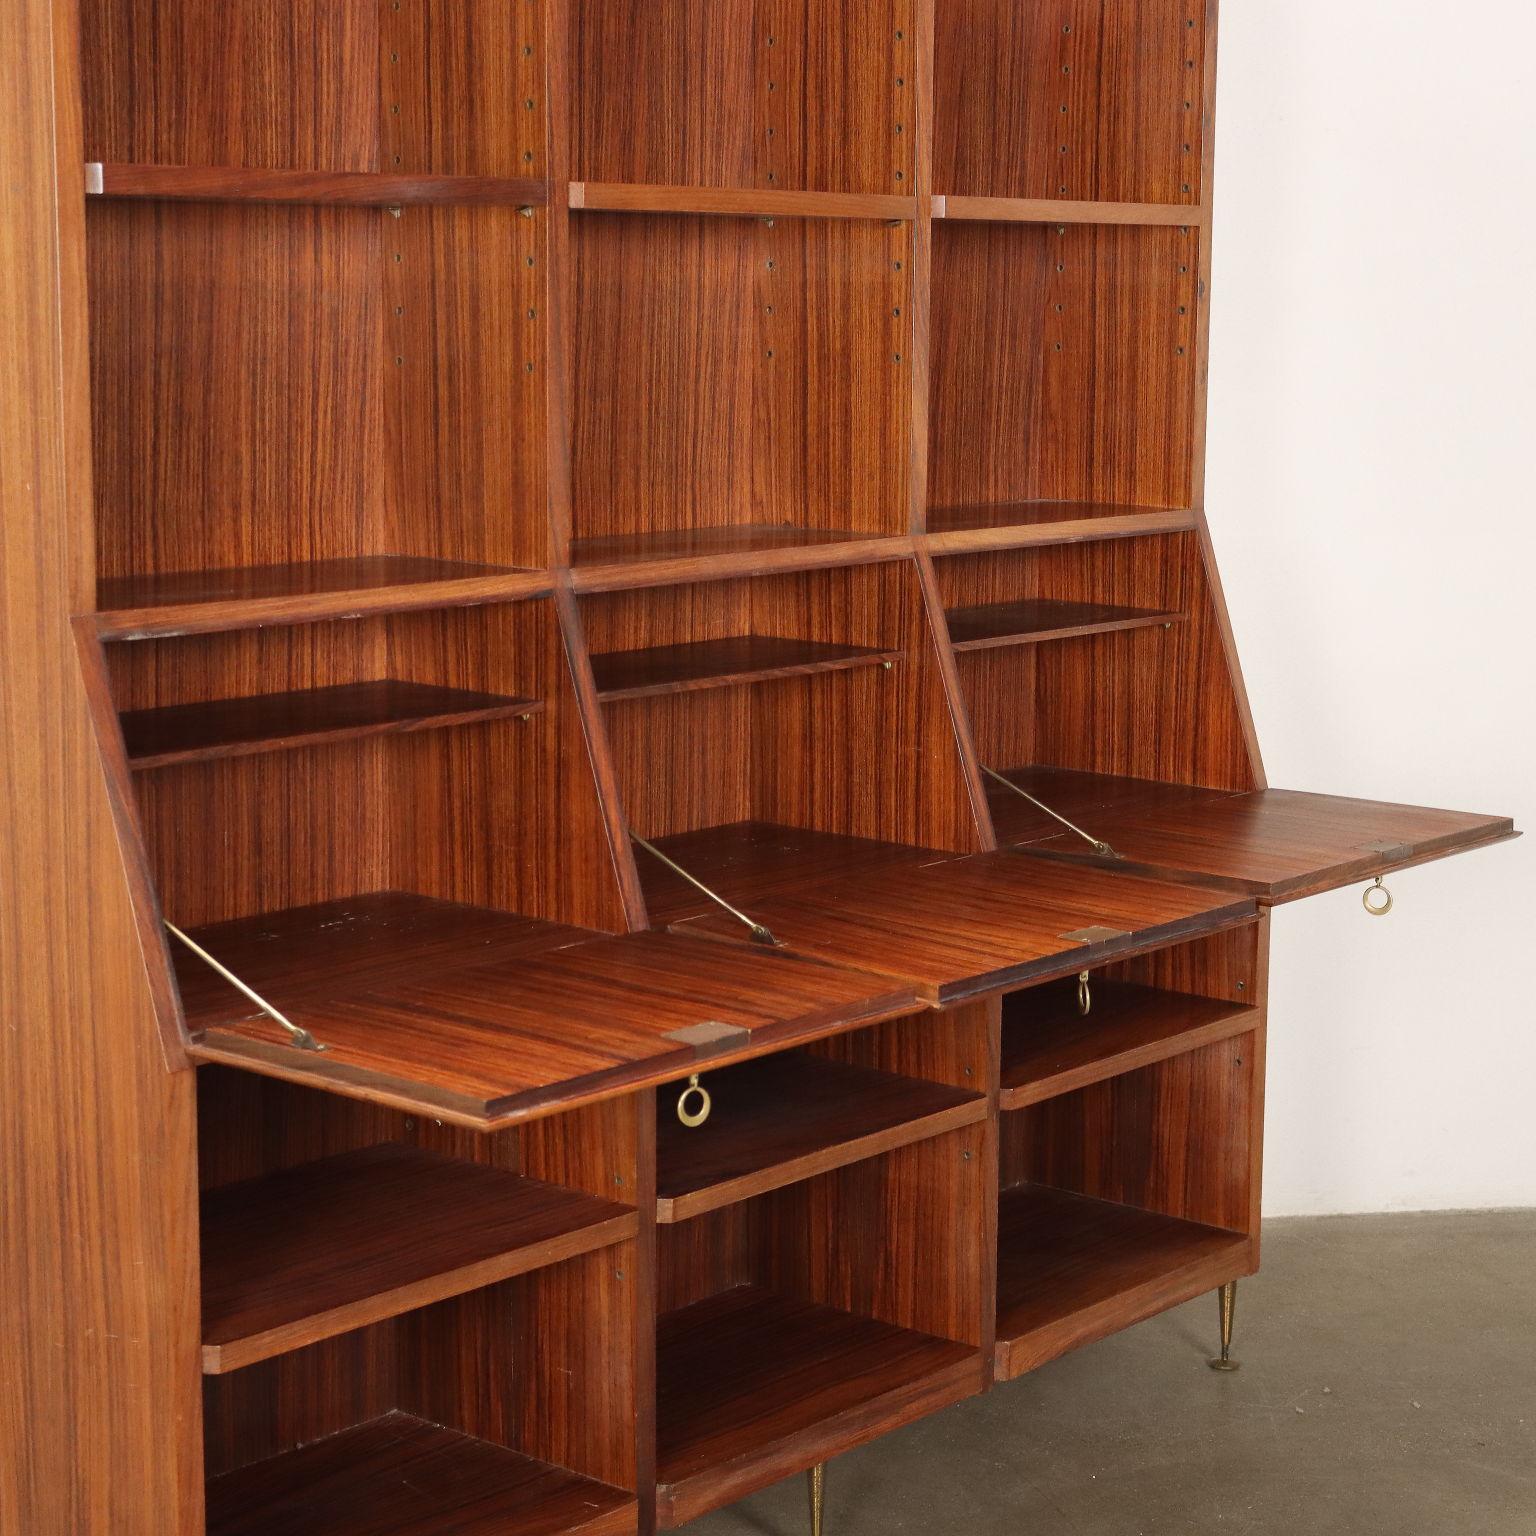 Vintage Bookshelf Exotic Wood Italy, 1960s For Sale 2